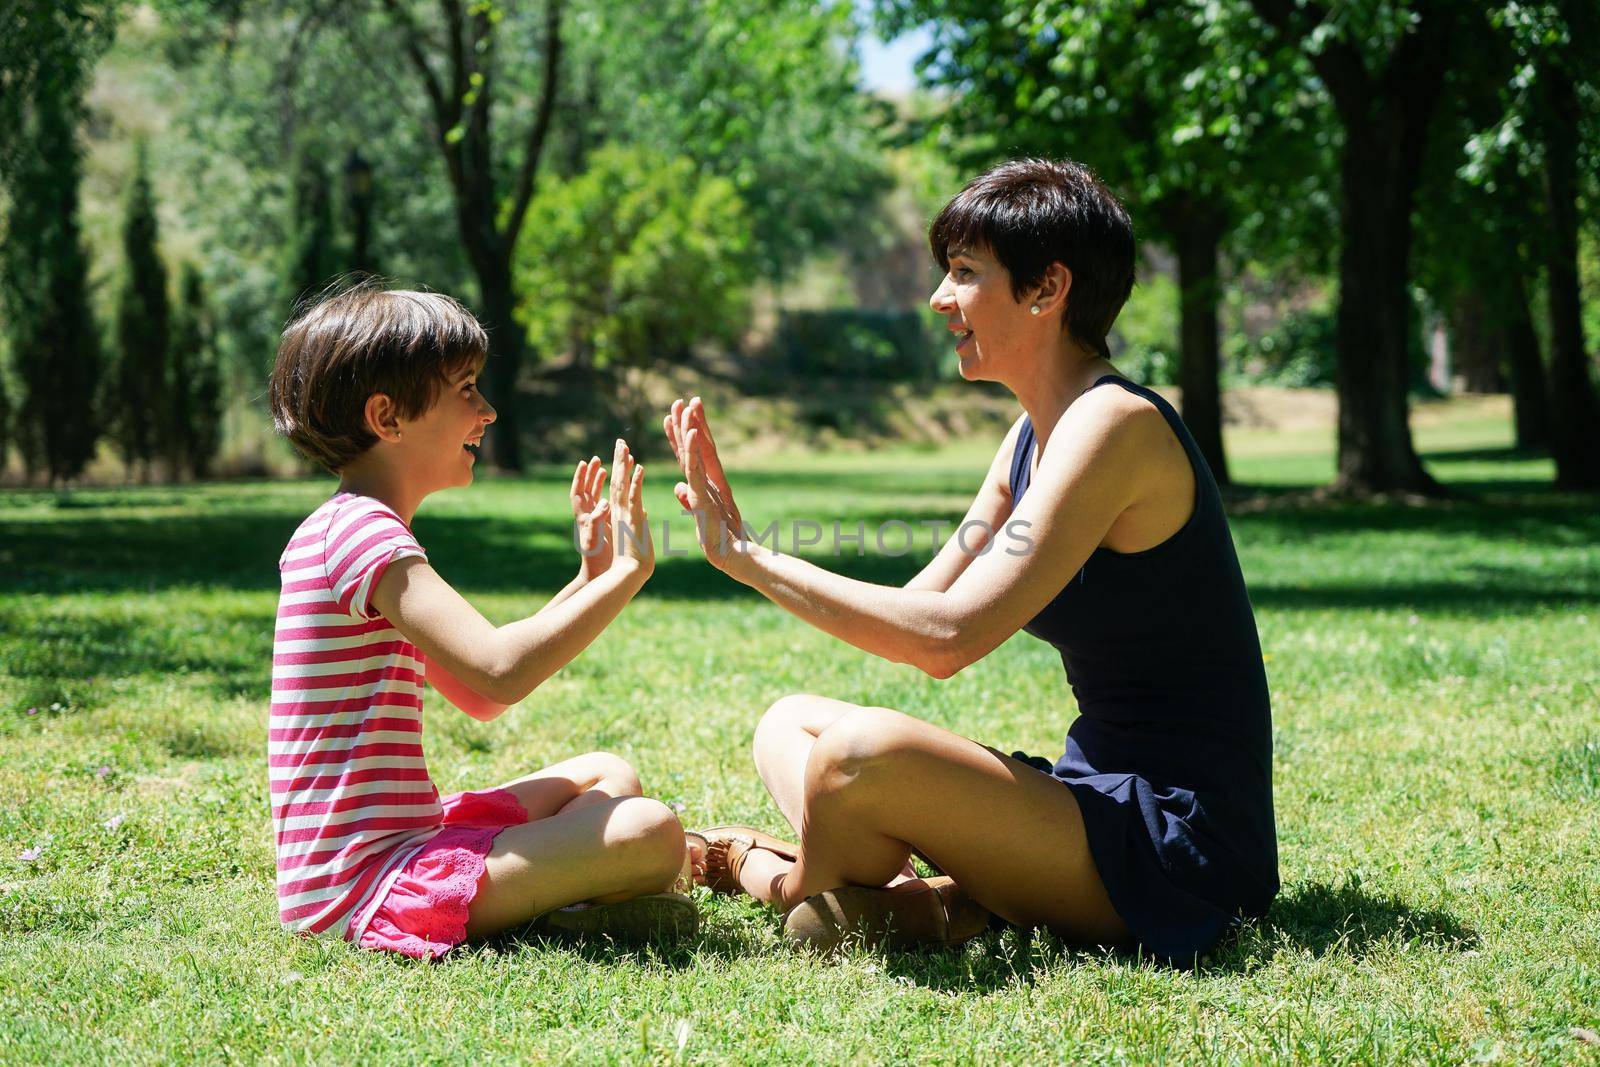 Mother and daughter playing with hands in city park. Happy loving family.